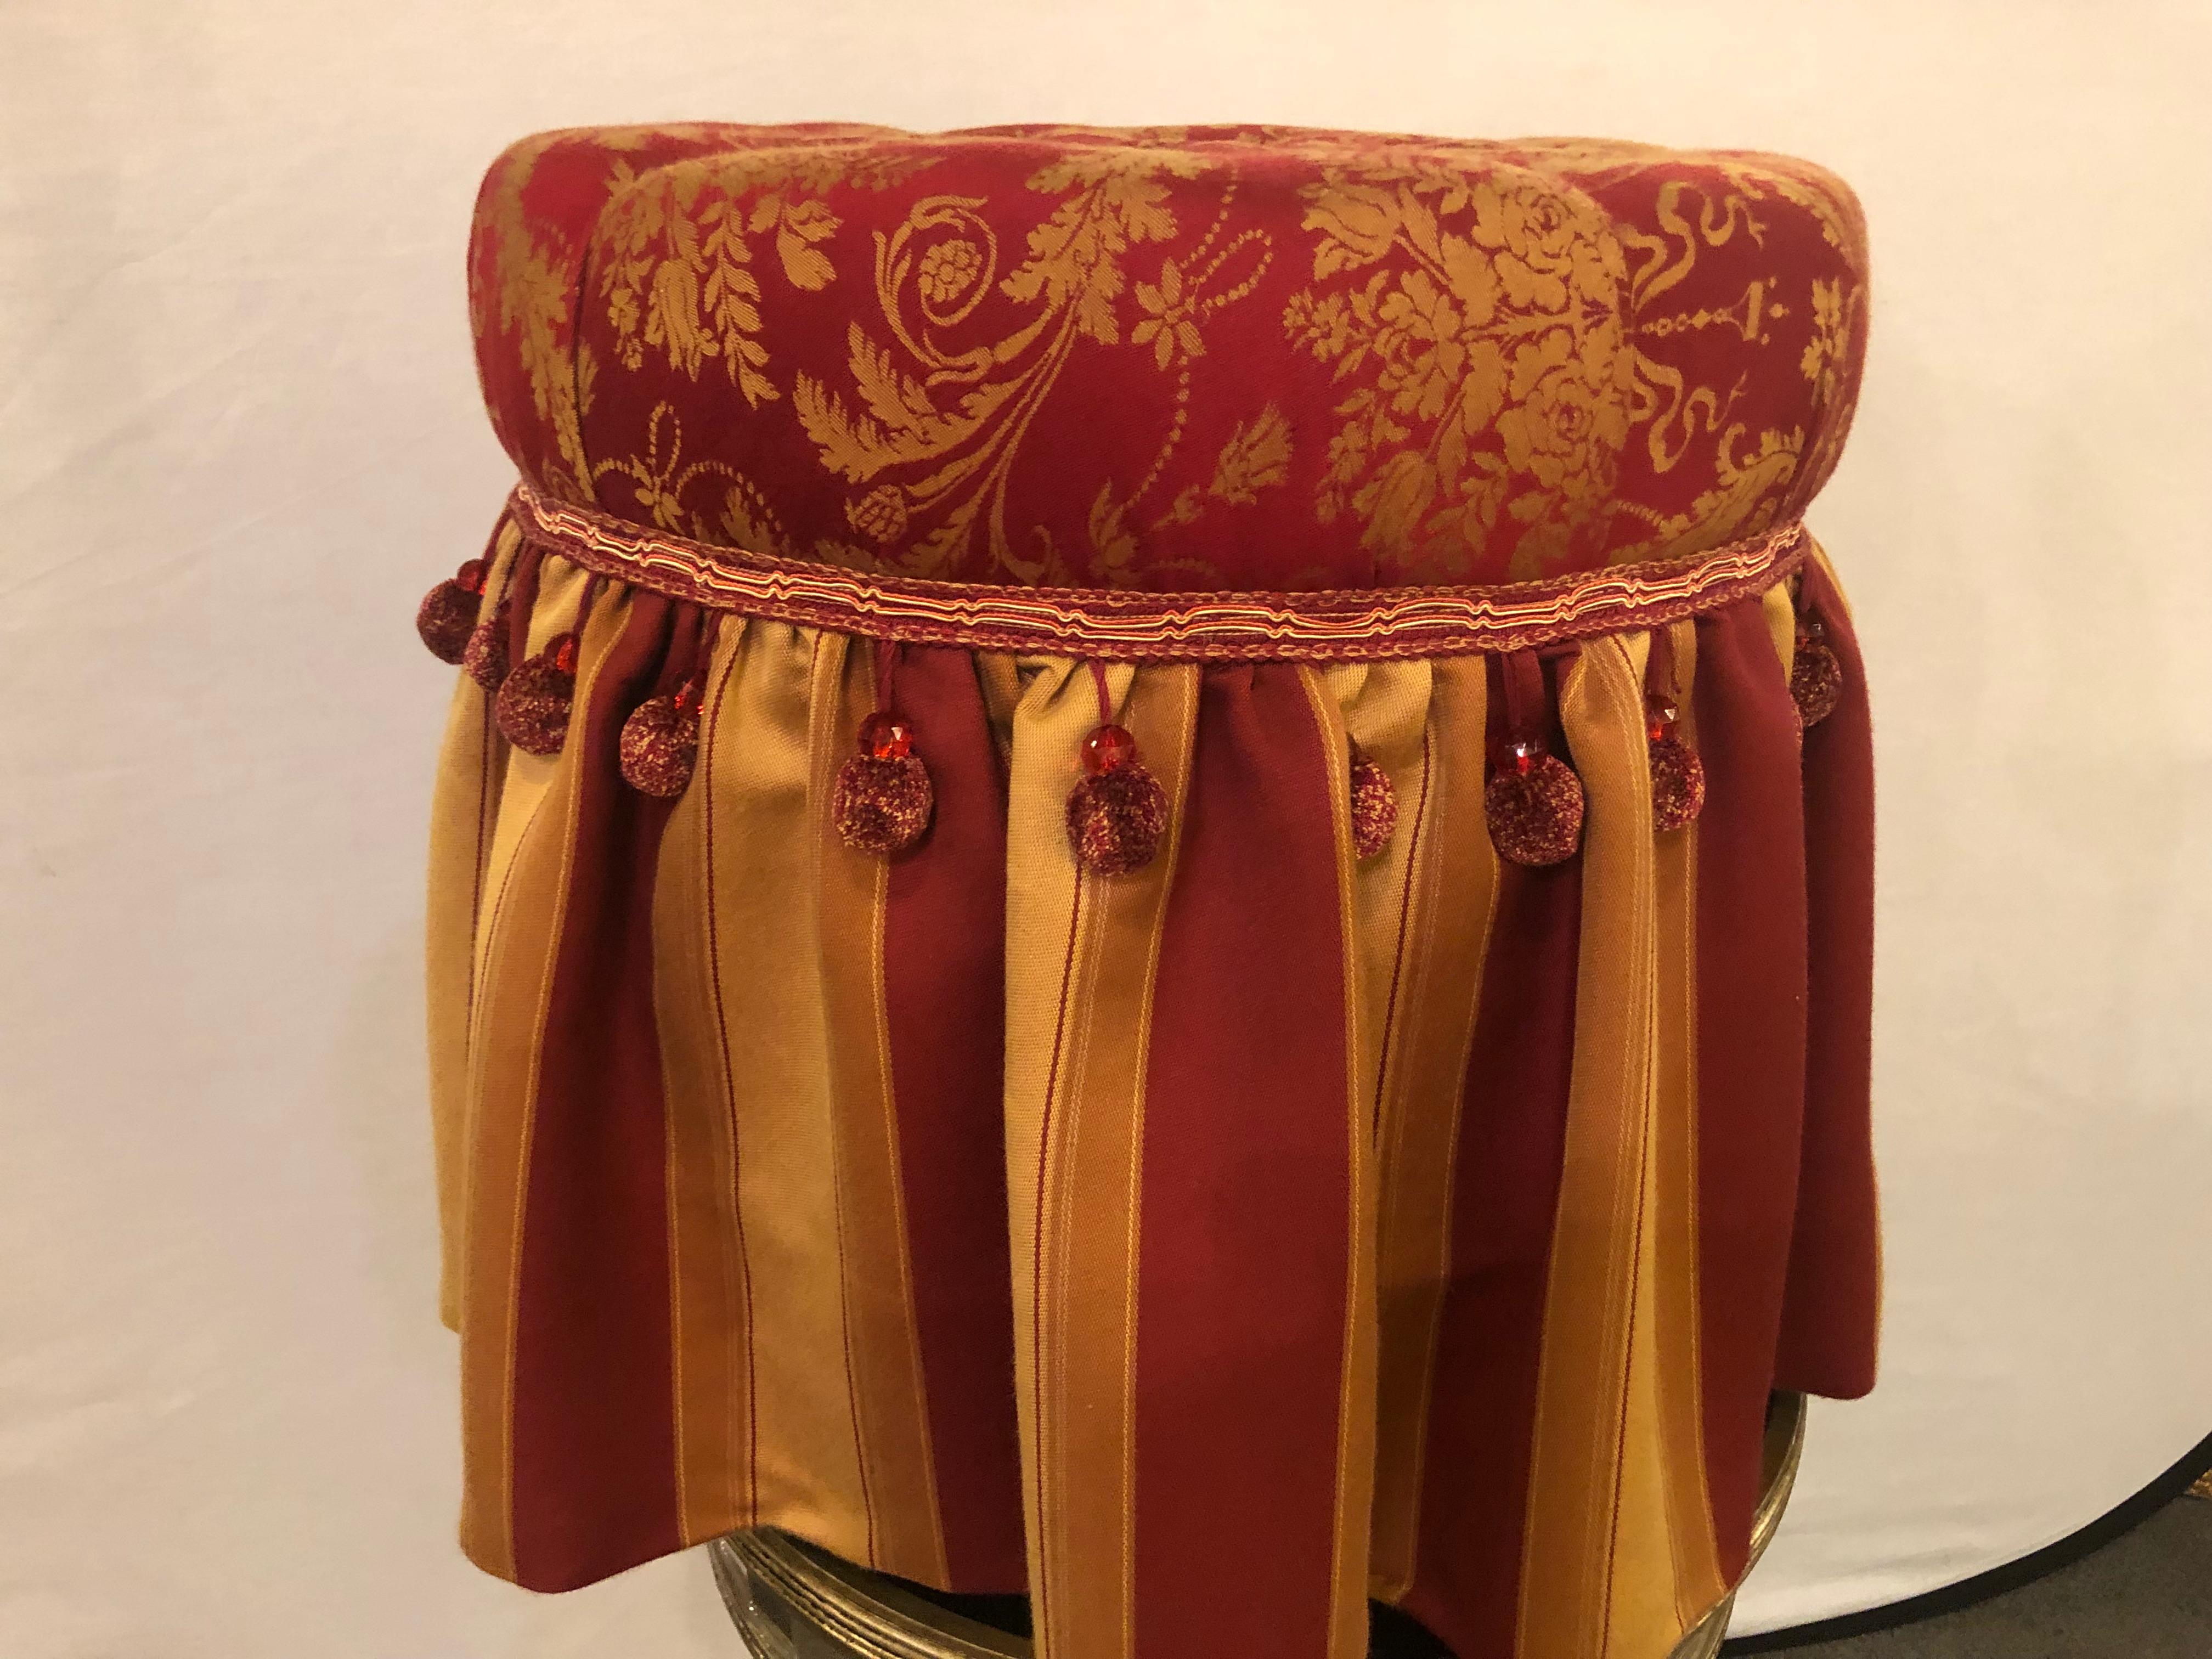 Deco Upholstered Tufted Red and Gilt Decorated Ottoman or Footstool In Good Condition In Stamford, CT